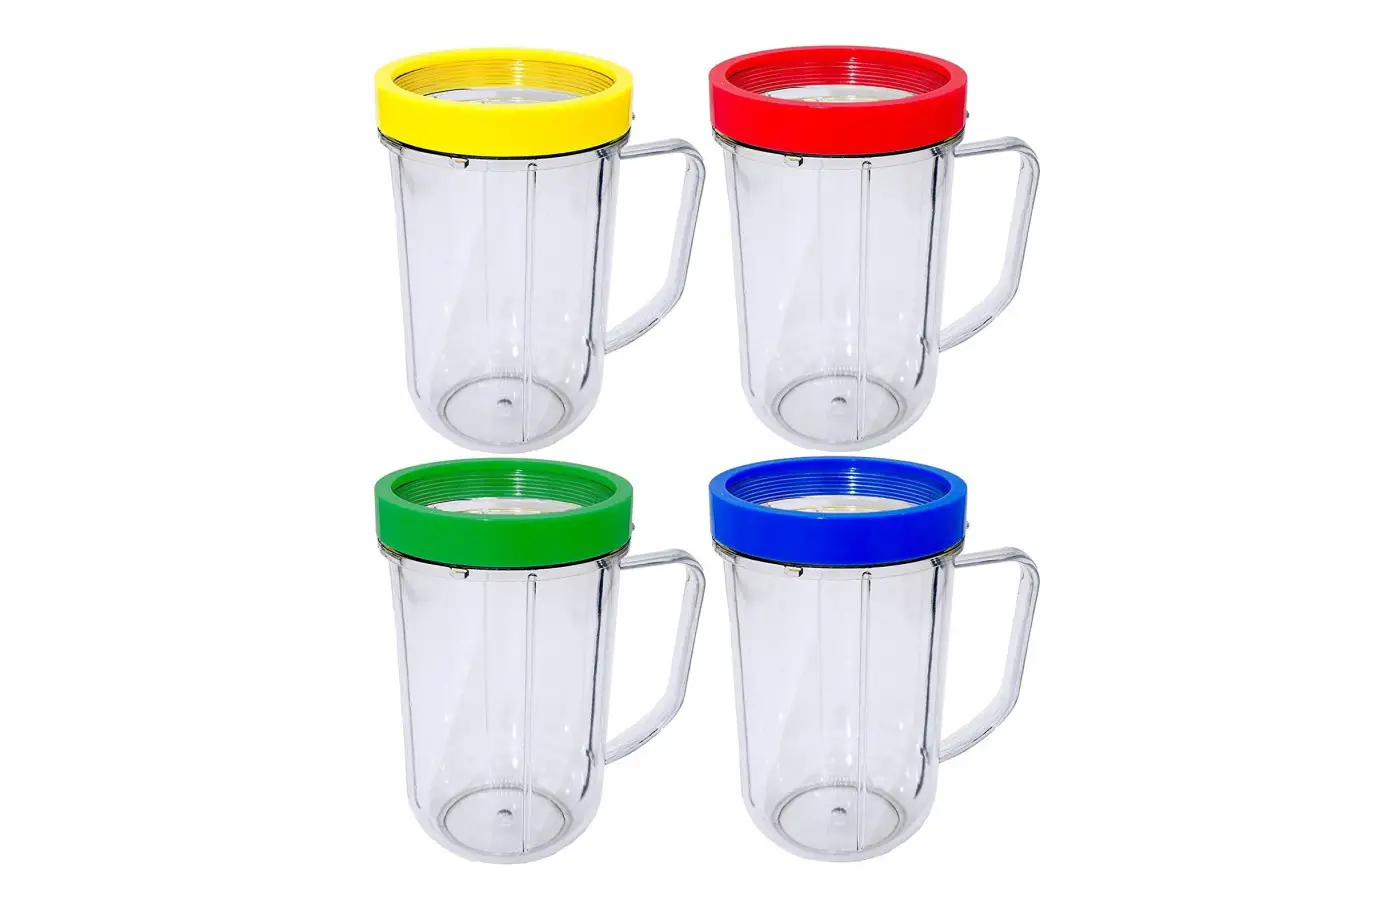 The Magic Bullet offers lip rings on their cups for a more comfortable sipping experience.